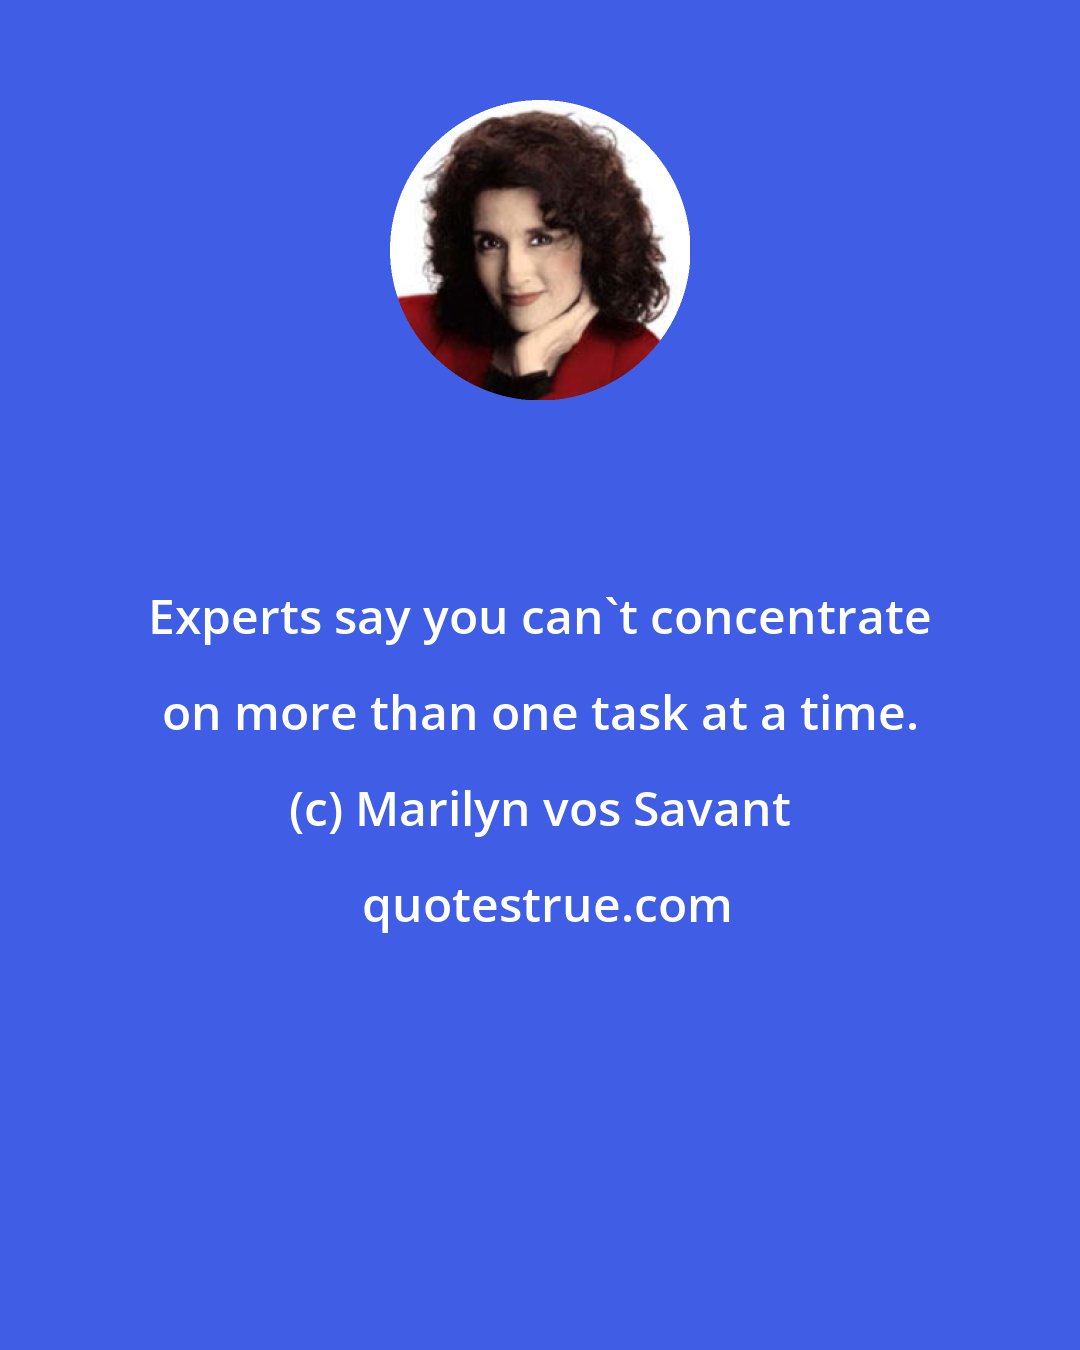 Marilyn vos Savant: Experts say you can't concentrate on more than one task at a time.